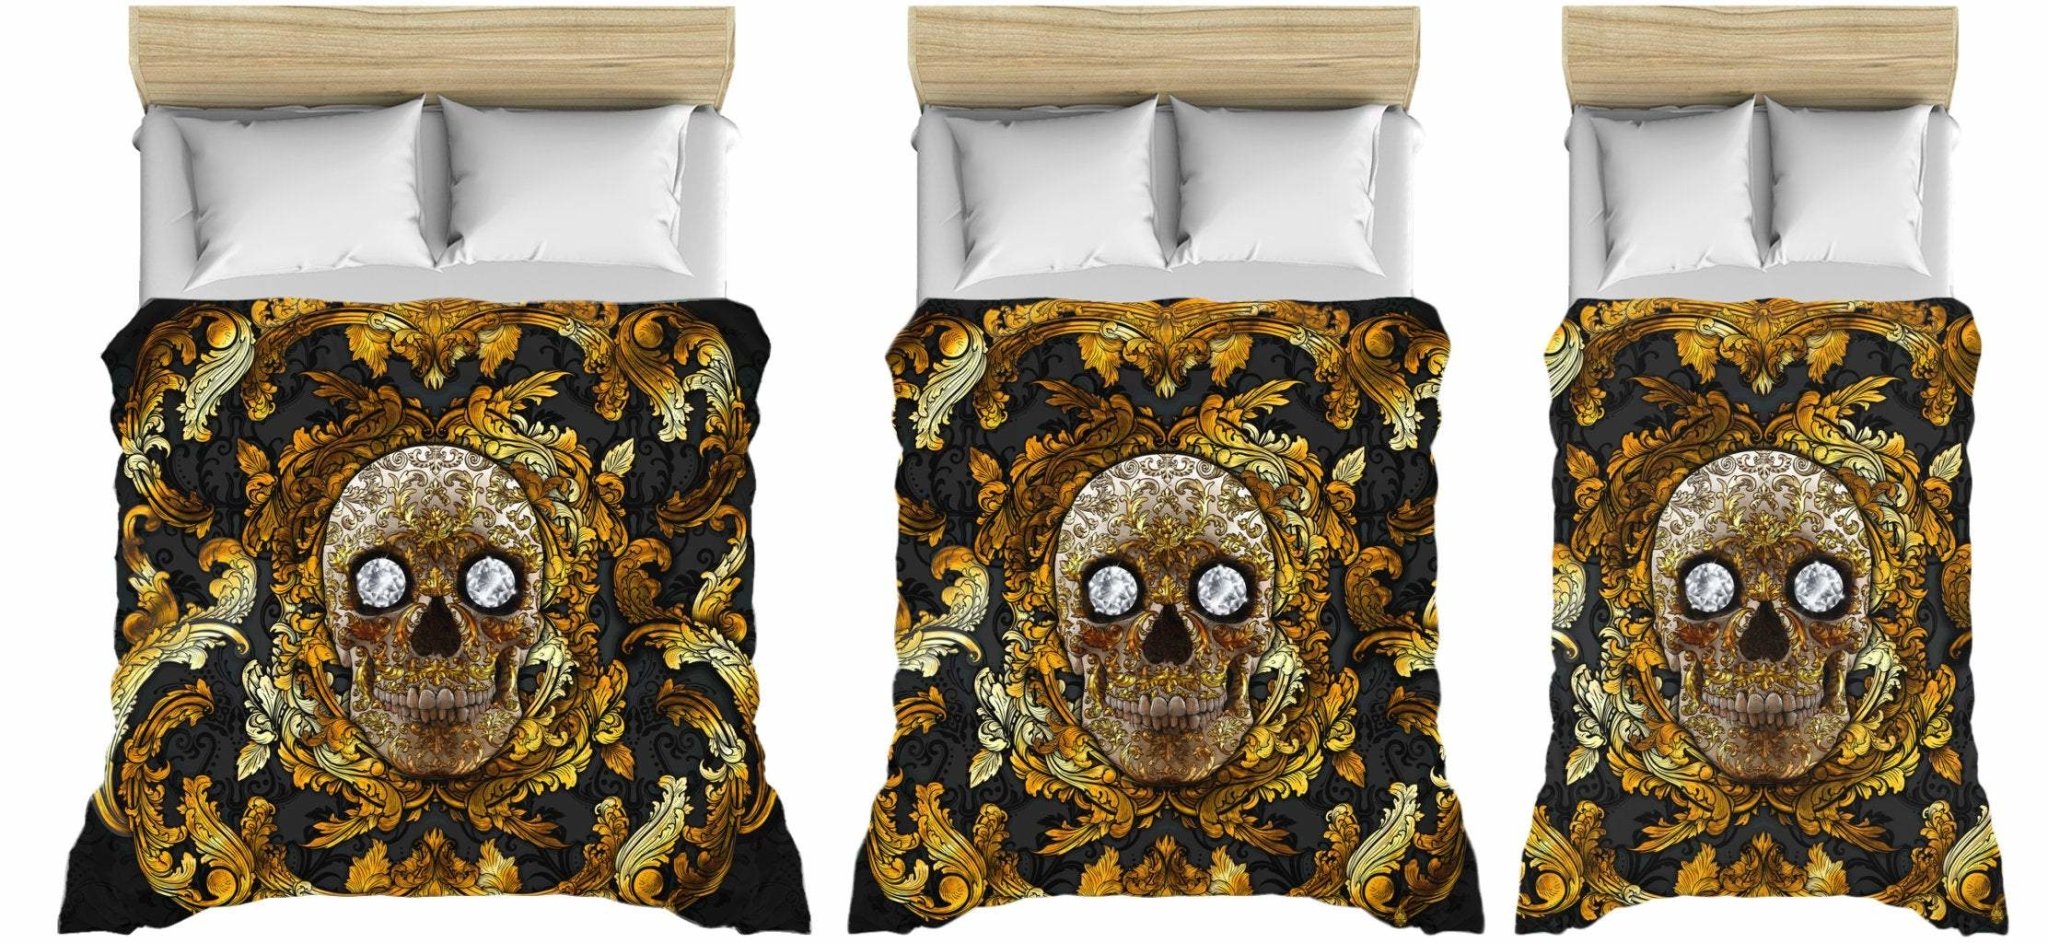 Skull Bedding Set, Comforter and Duvet, Victorian Gothic Bed Cover and Bedroom Decor, King, Queen and Twin Size - Gold and Diamonds - Abysm Internal